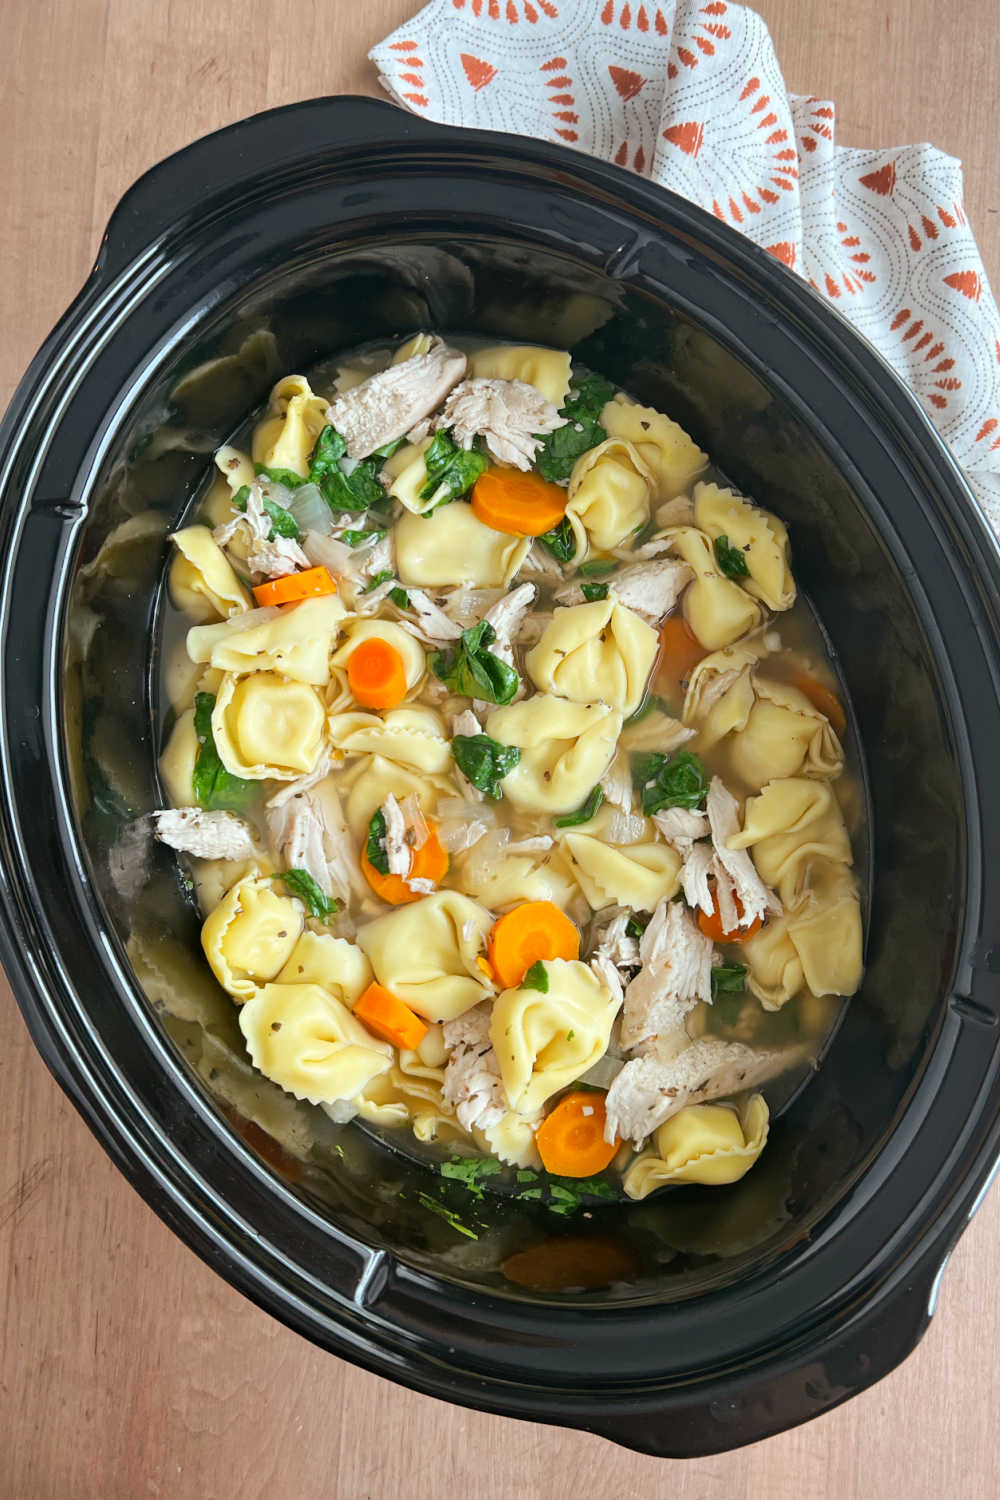 crock pot chicken tortellini soup with shredded chicken, carrots and fresh spinach in slow cooker.